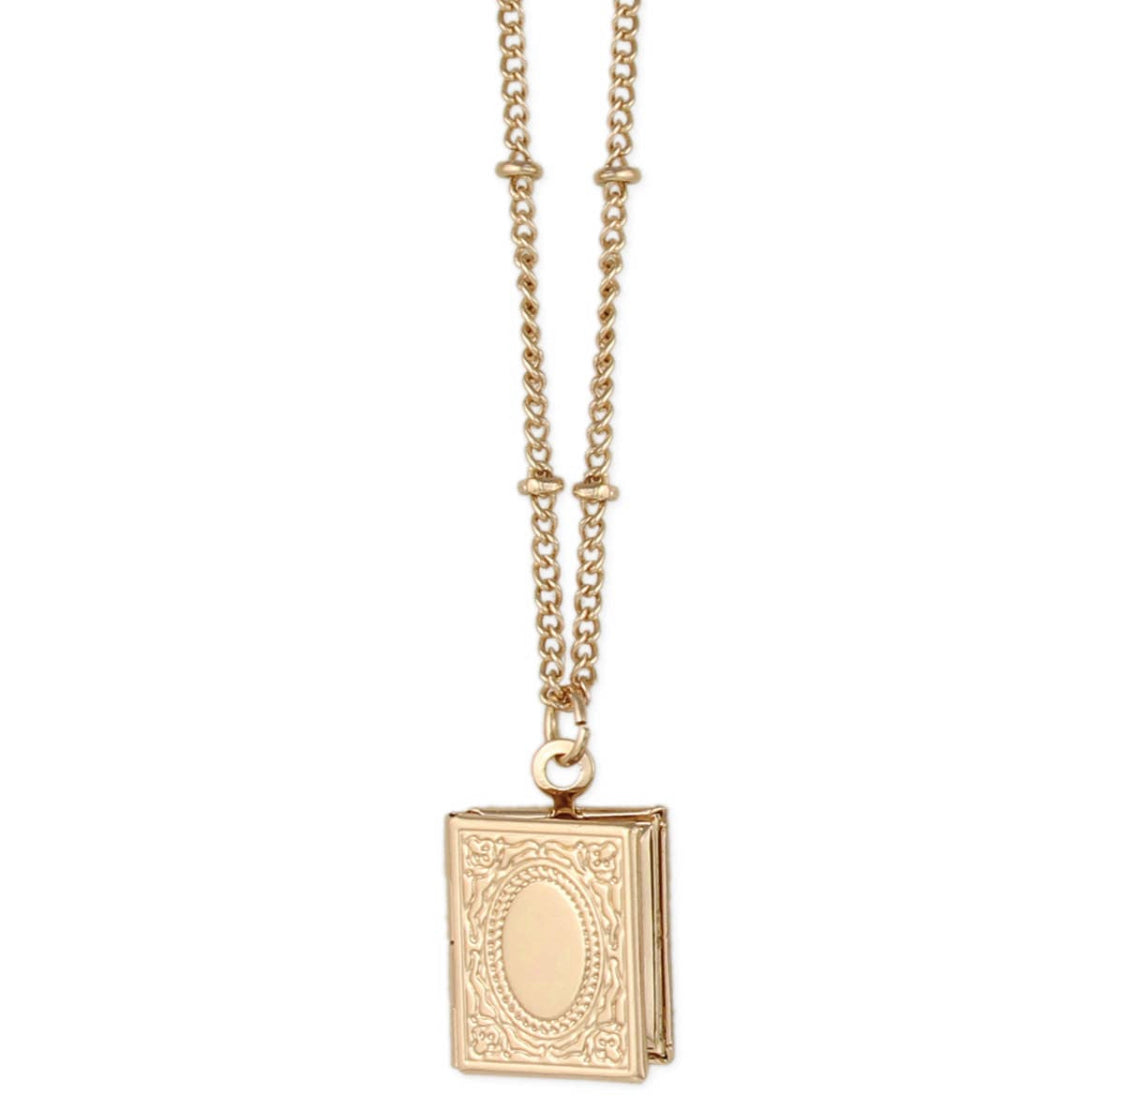 18K Gold Plated Engraved Book Locket Gold Square Pendant Necklace In  Stainless Steel With Peris Box Perfect Graduation Gift From Miranleroy,  $12.7 | DHgate.Com